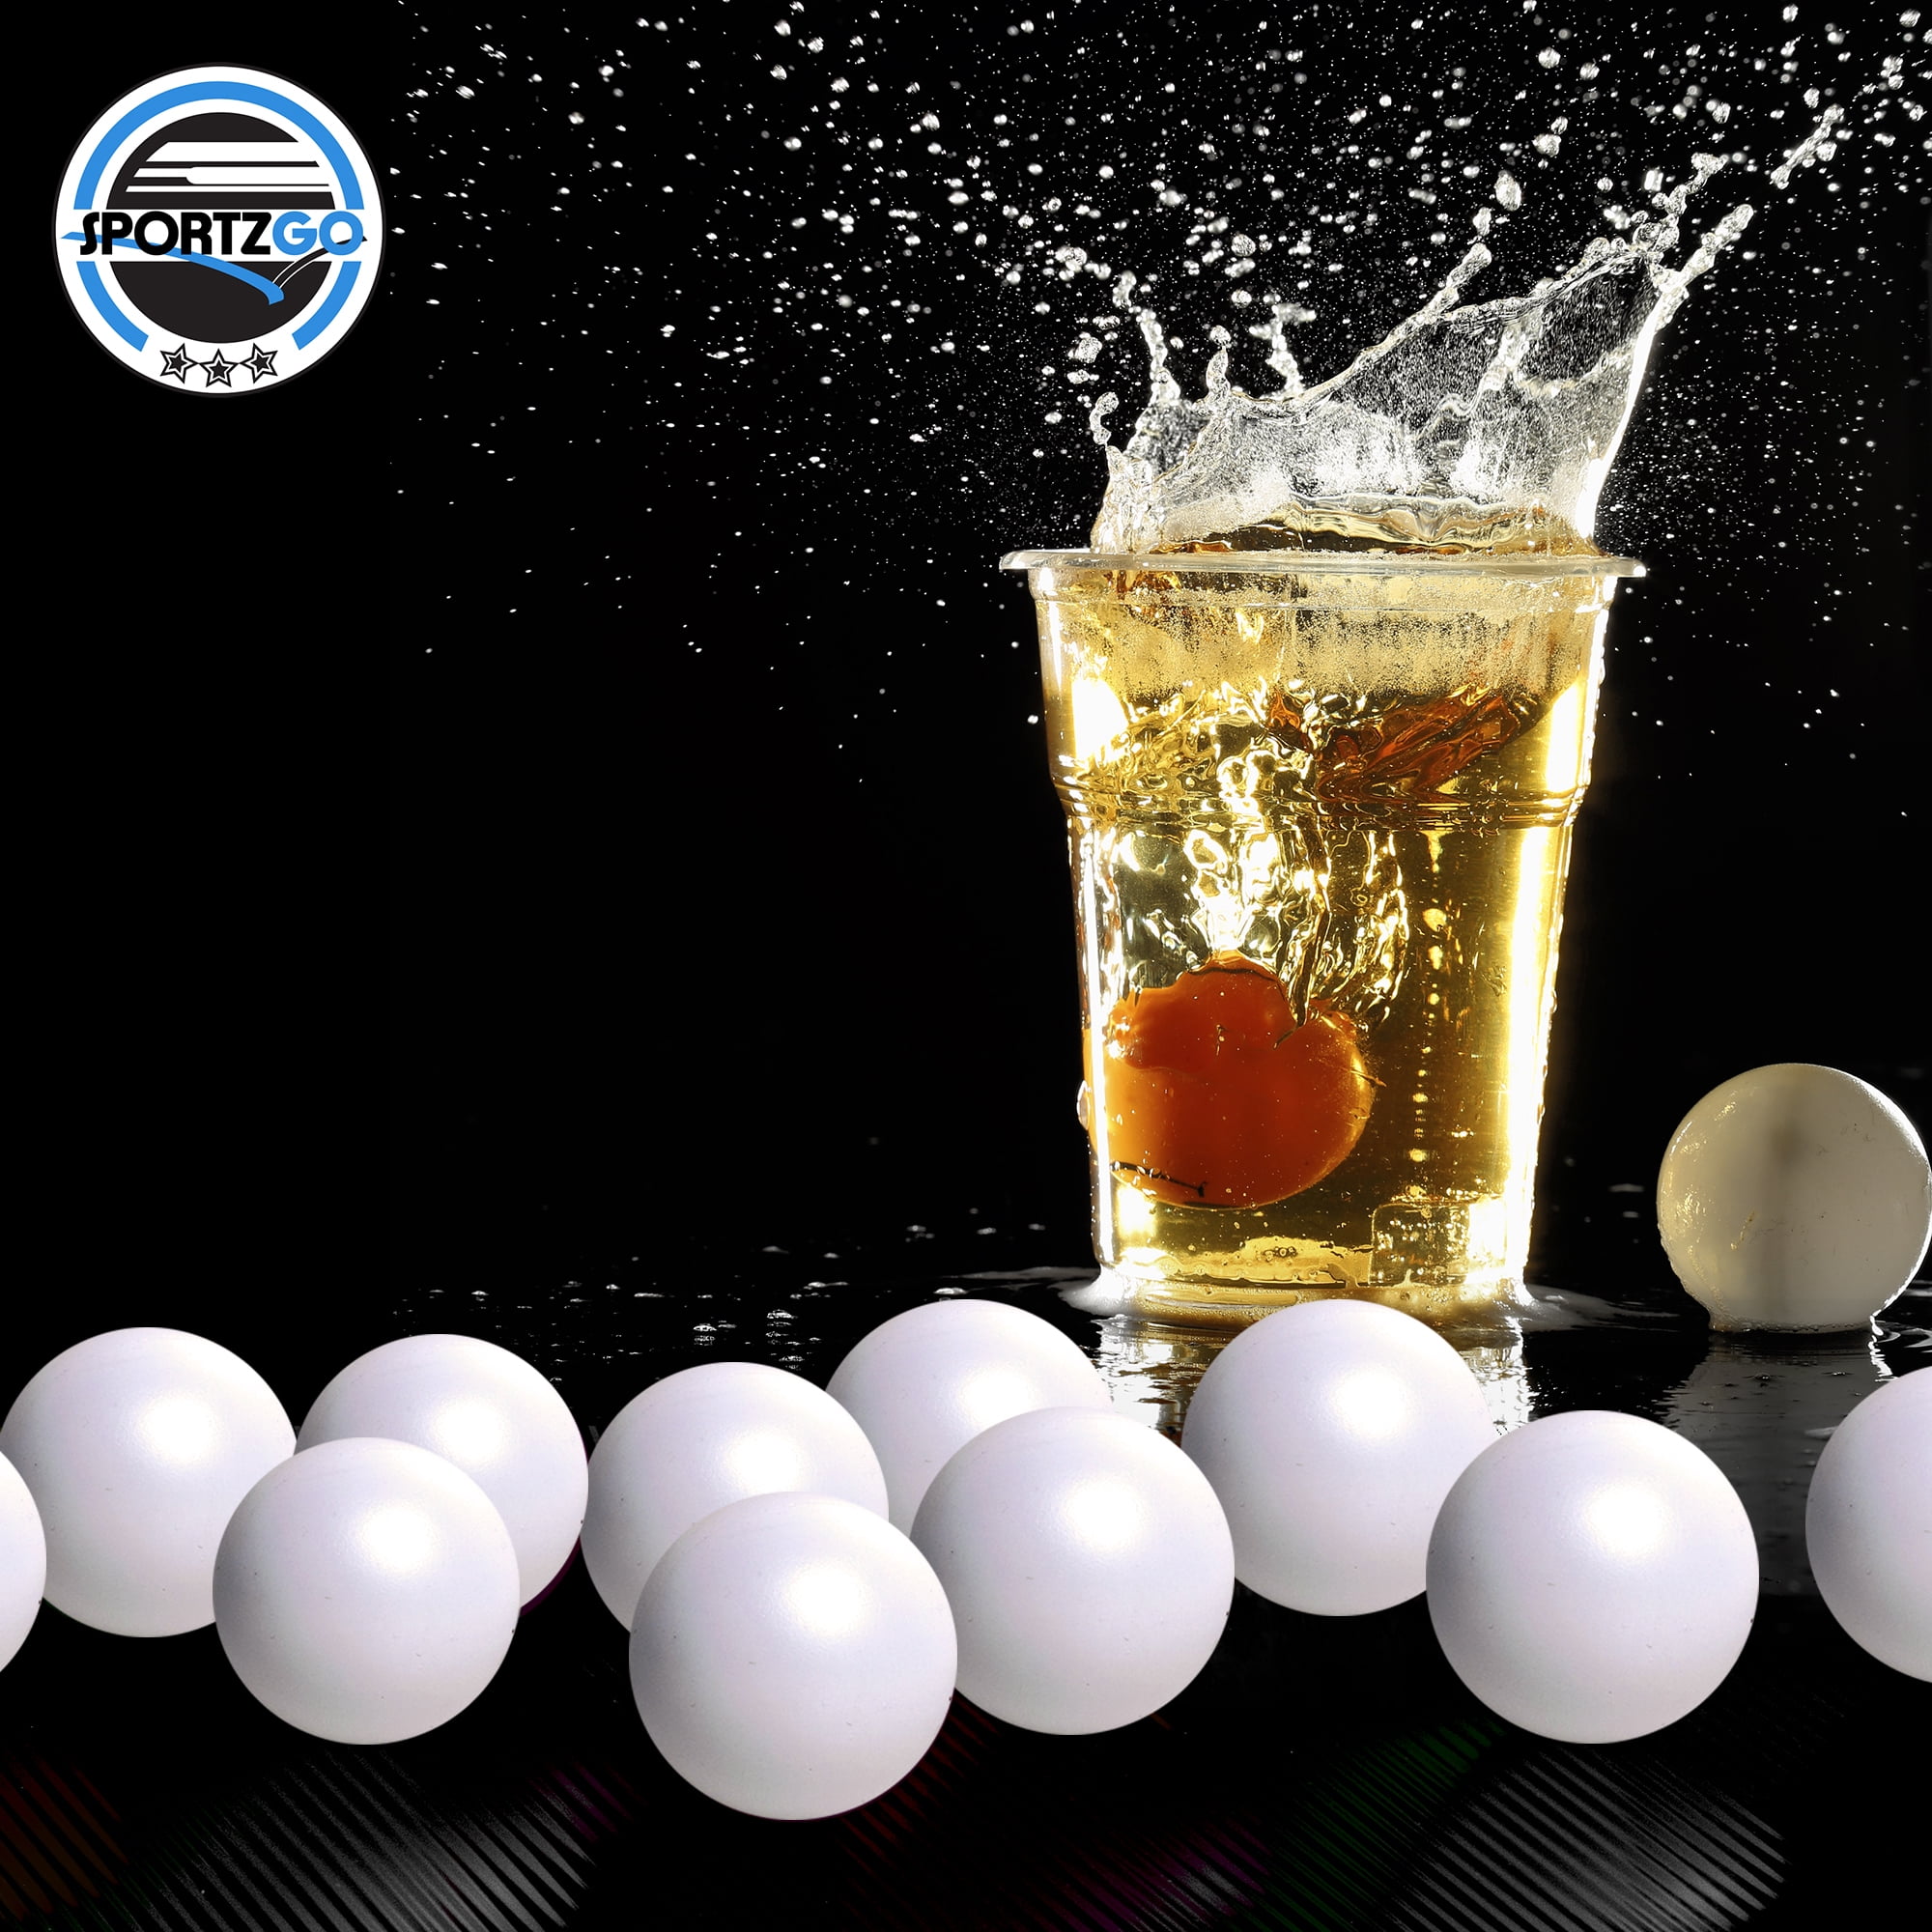 Great For Table Tennis Ping Tournaments Beer Balls Pong Balls 48 Pack 38mm 